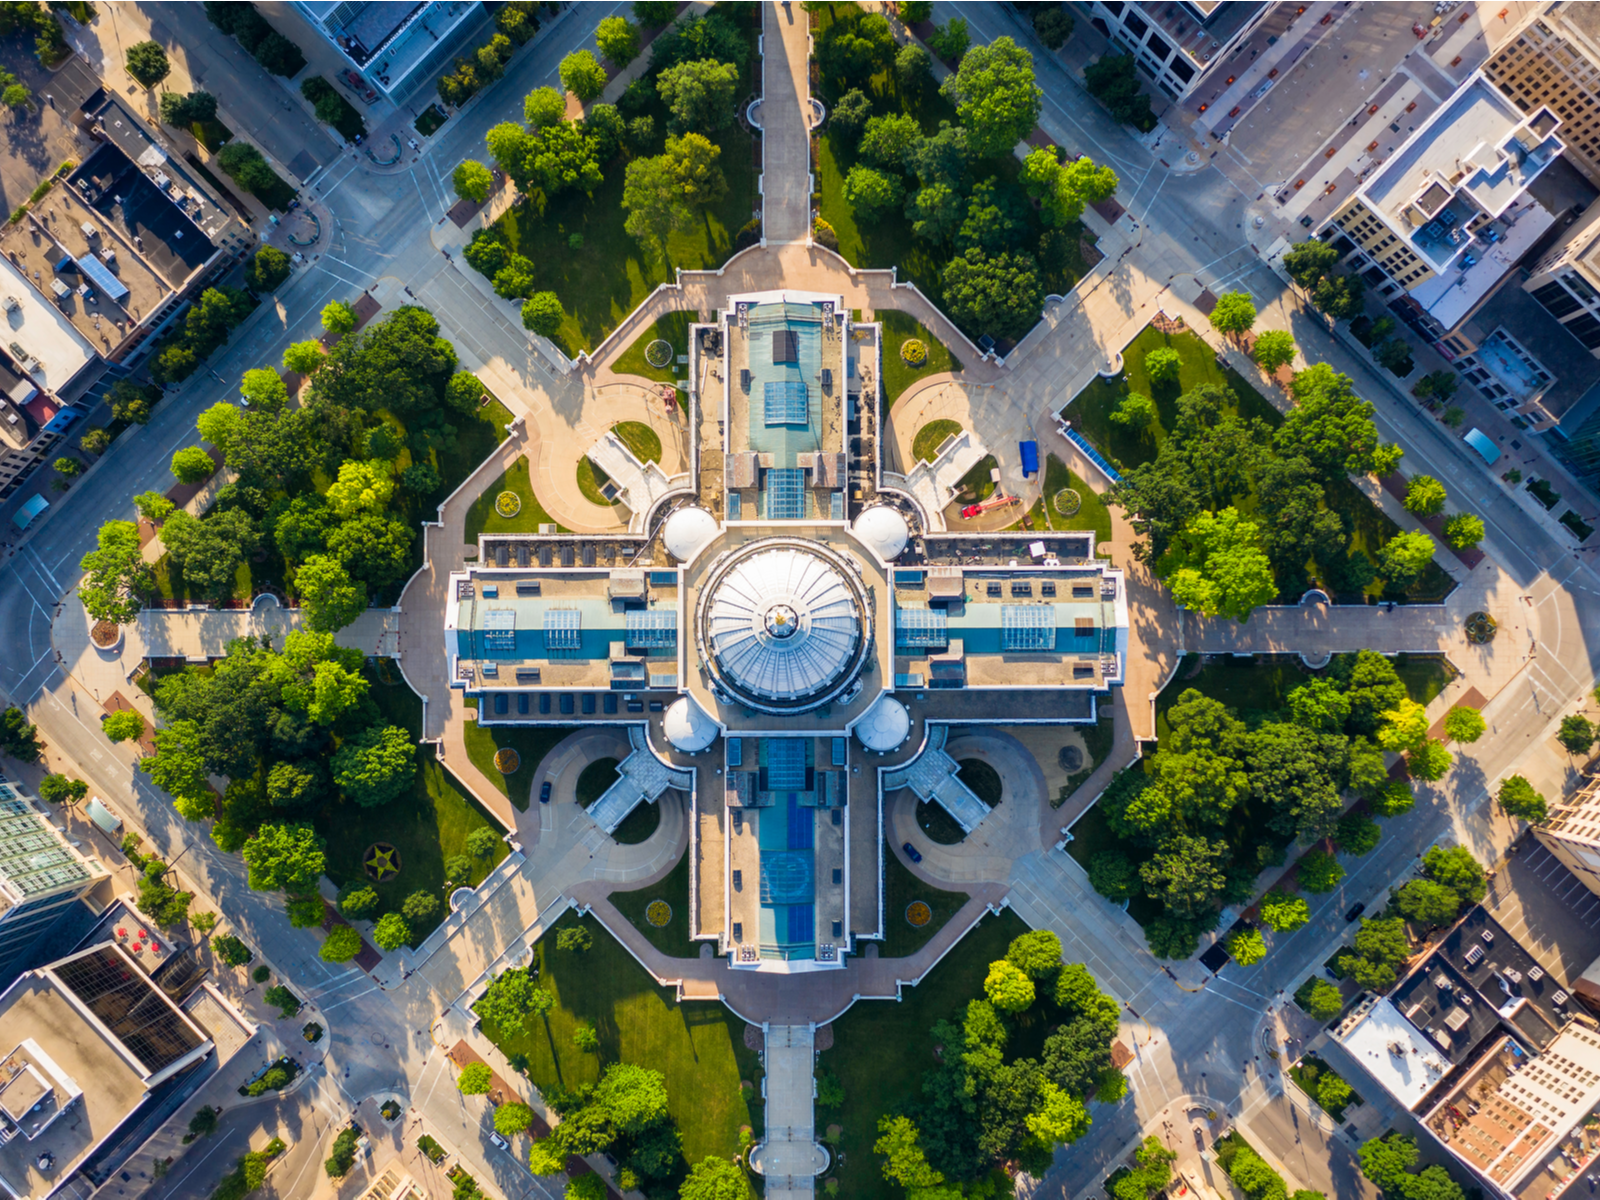 Overhead view on the Capitol Square with green landscape on each corner, one of the best Wisconsin tourist attractions